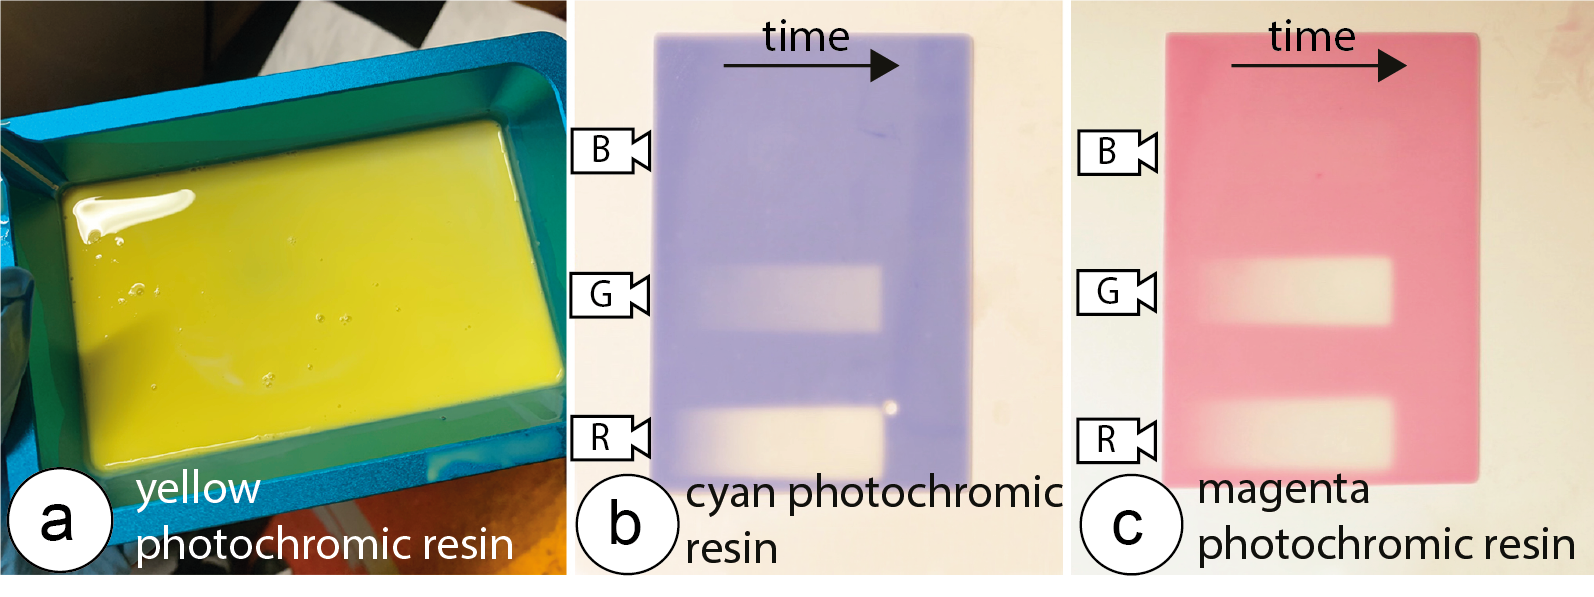 Three images showing different colored photochromic resins: The left image shows yellow resin in a resin tank; The centre images shows the effect of shining R, G, B light on the cyan resin (blue light had no effect on the cyan resin, green light deactivates the cyan resin slowly, red light deactivates the cyan fastest); The right images shows the effect of shining R, G, B light on the magenta resin (blue light had no effect on the magenta resin, green light and red light both deactivate the magenta resin to approximately the same degree).